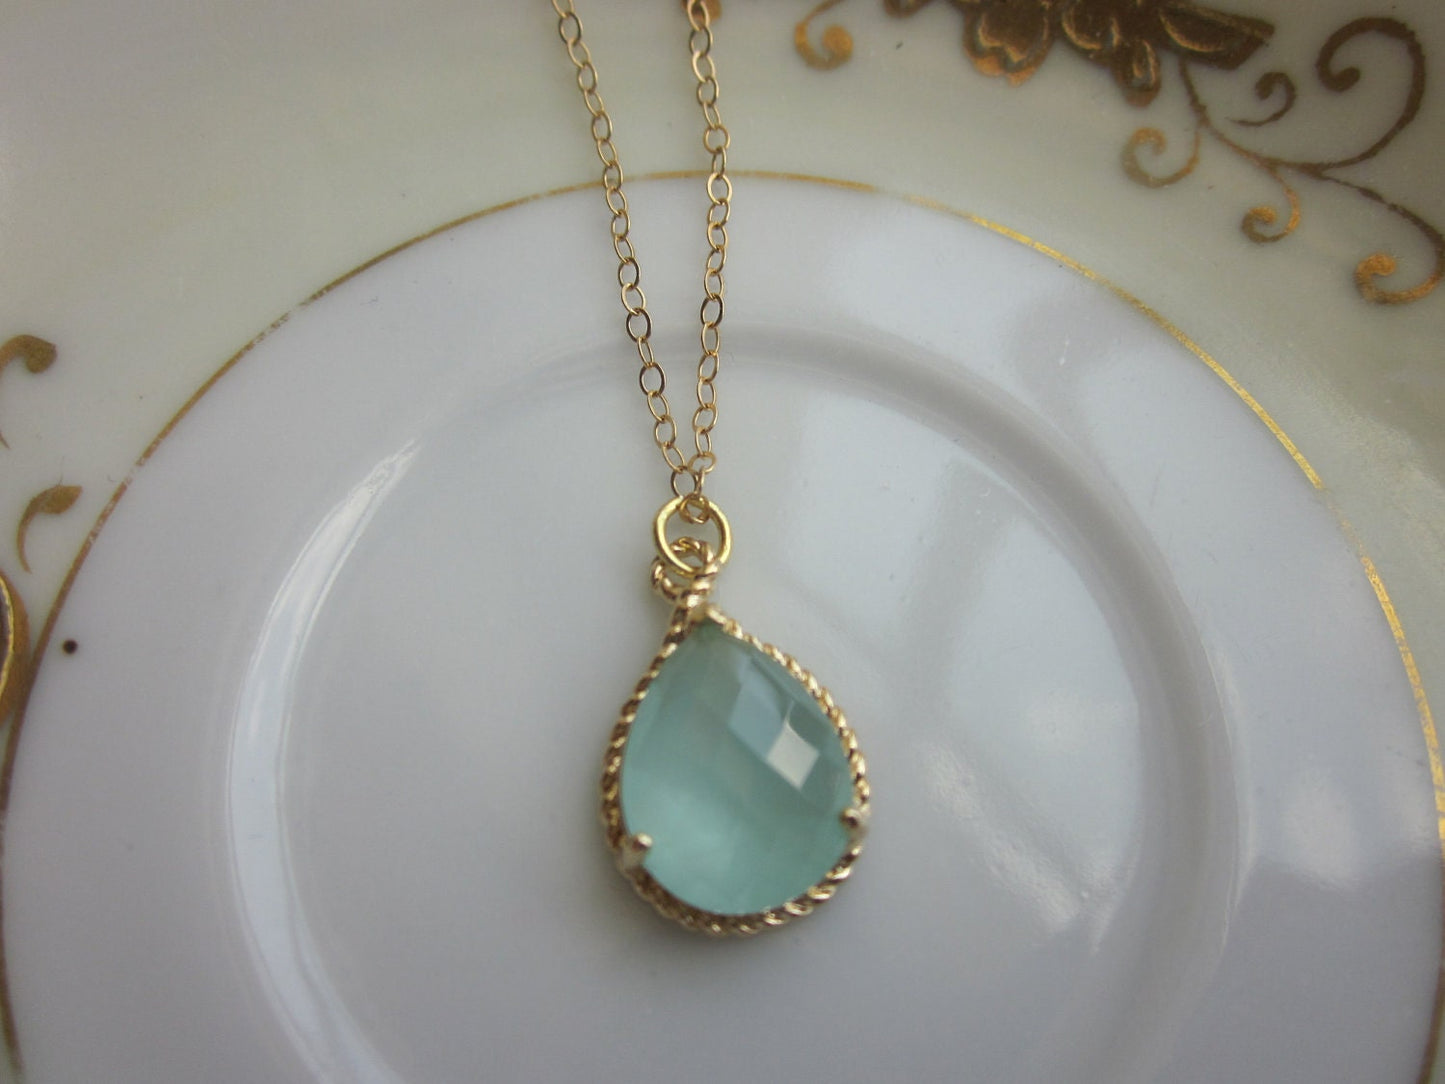 Pacific Aqua Blue Mint Pendant Necklace Gold Teardrop - 14k Gold Filled Chain - Bridesmaid Necklace - Bridesmaid Jewelry - Wedding Jewelry